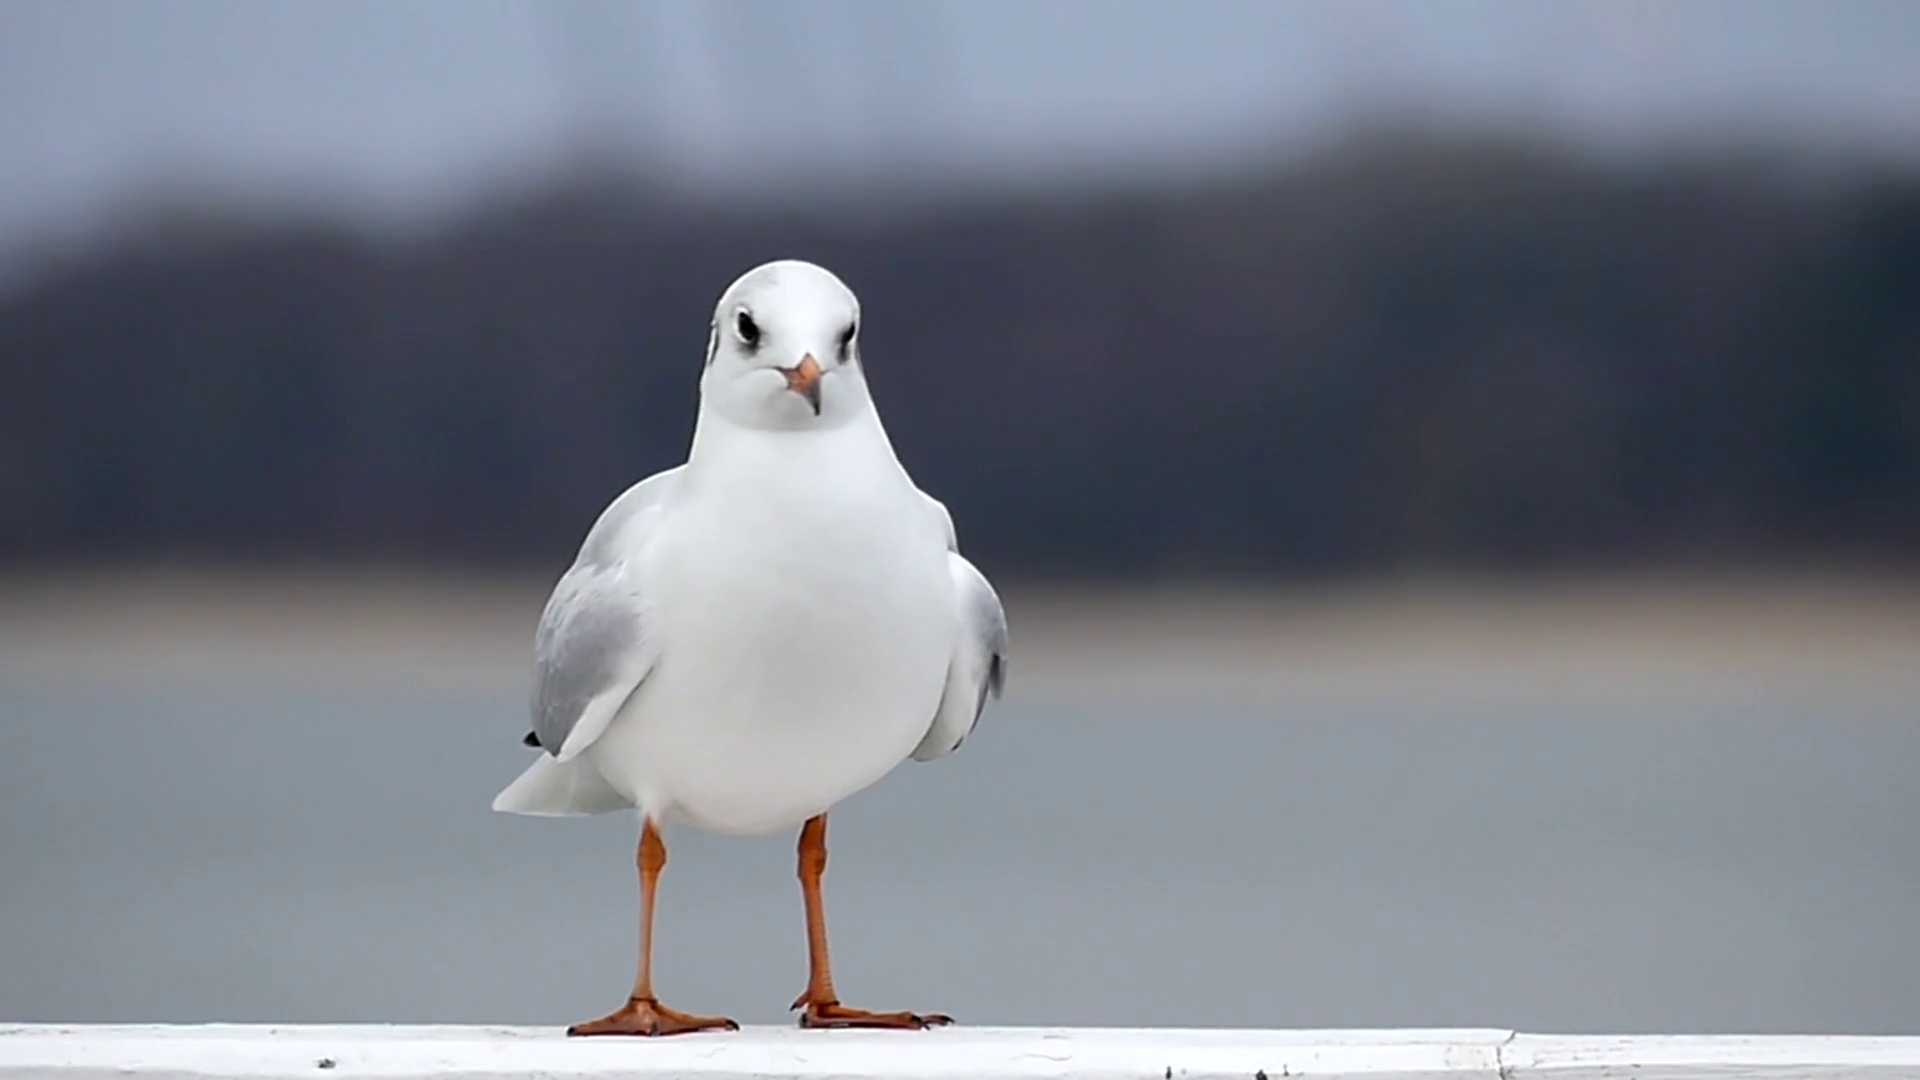 a Seagull Standing and Walking on a Stone Fence in Slow Motion ...